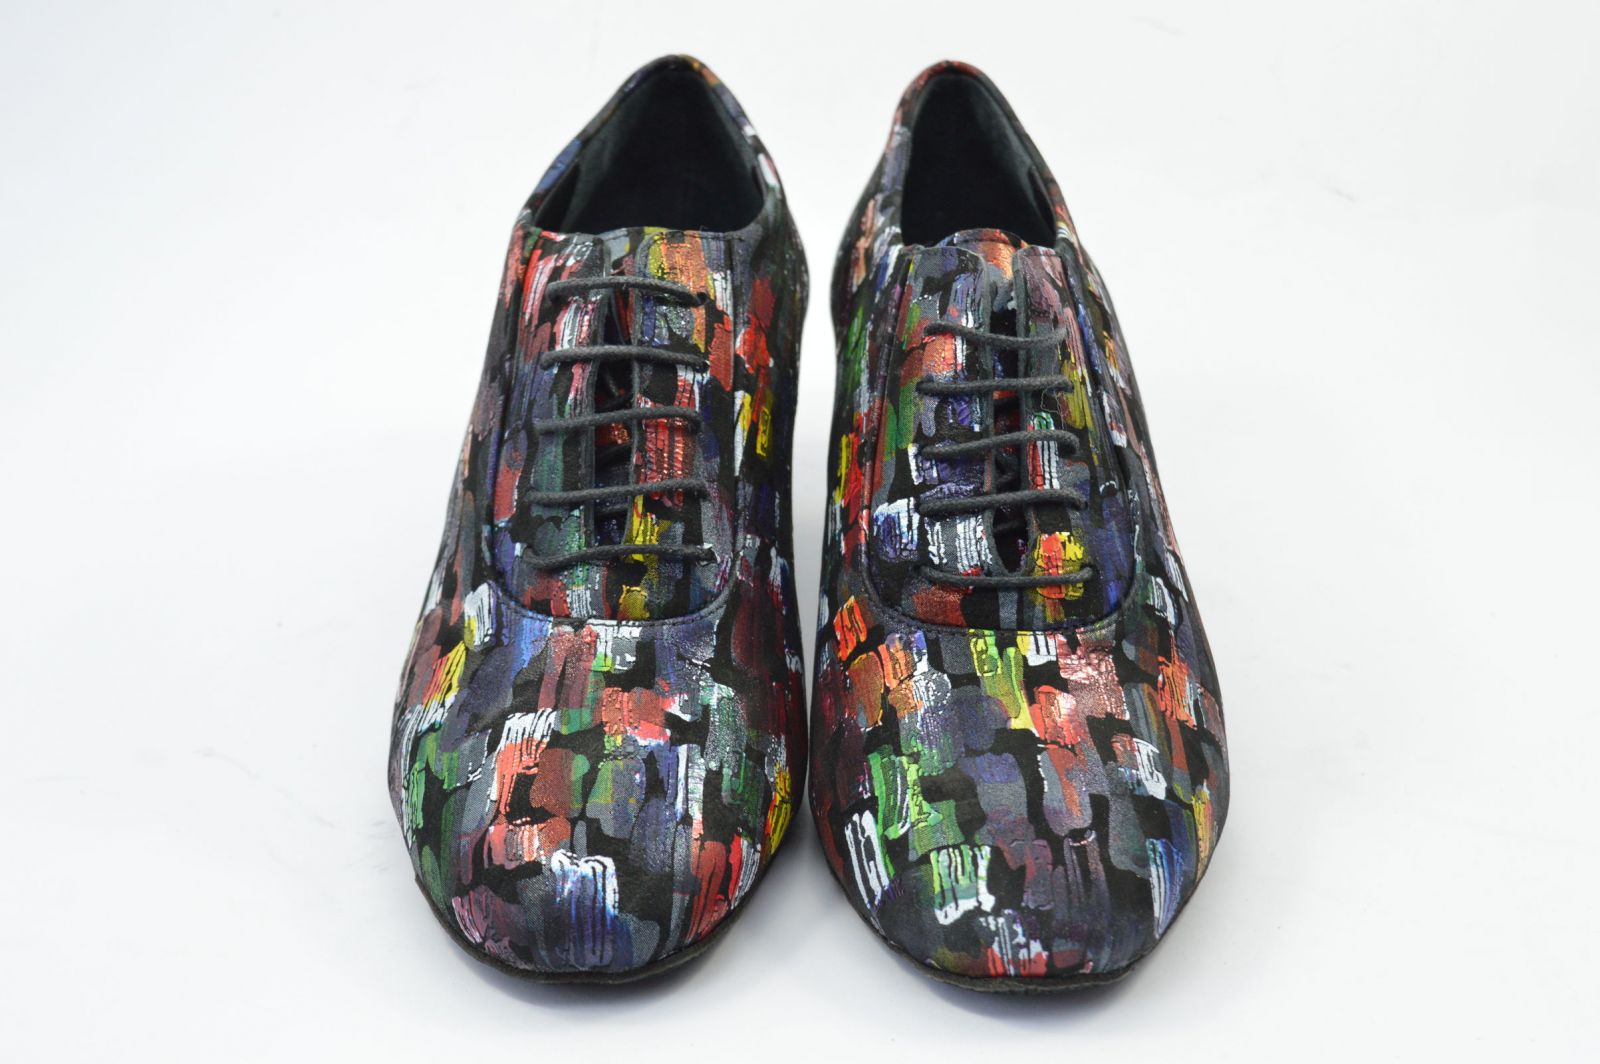 Women's argentine tango shoes, oxford style, in very soft black leather and multi-colour prints.